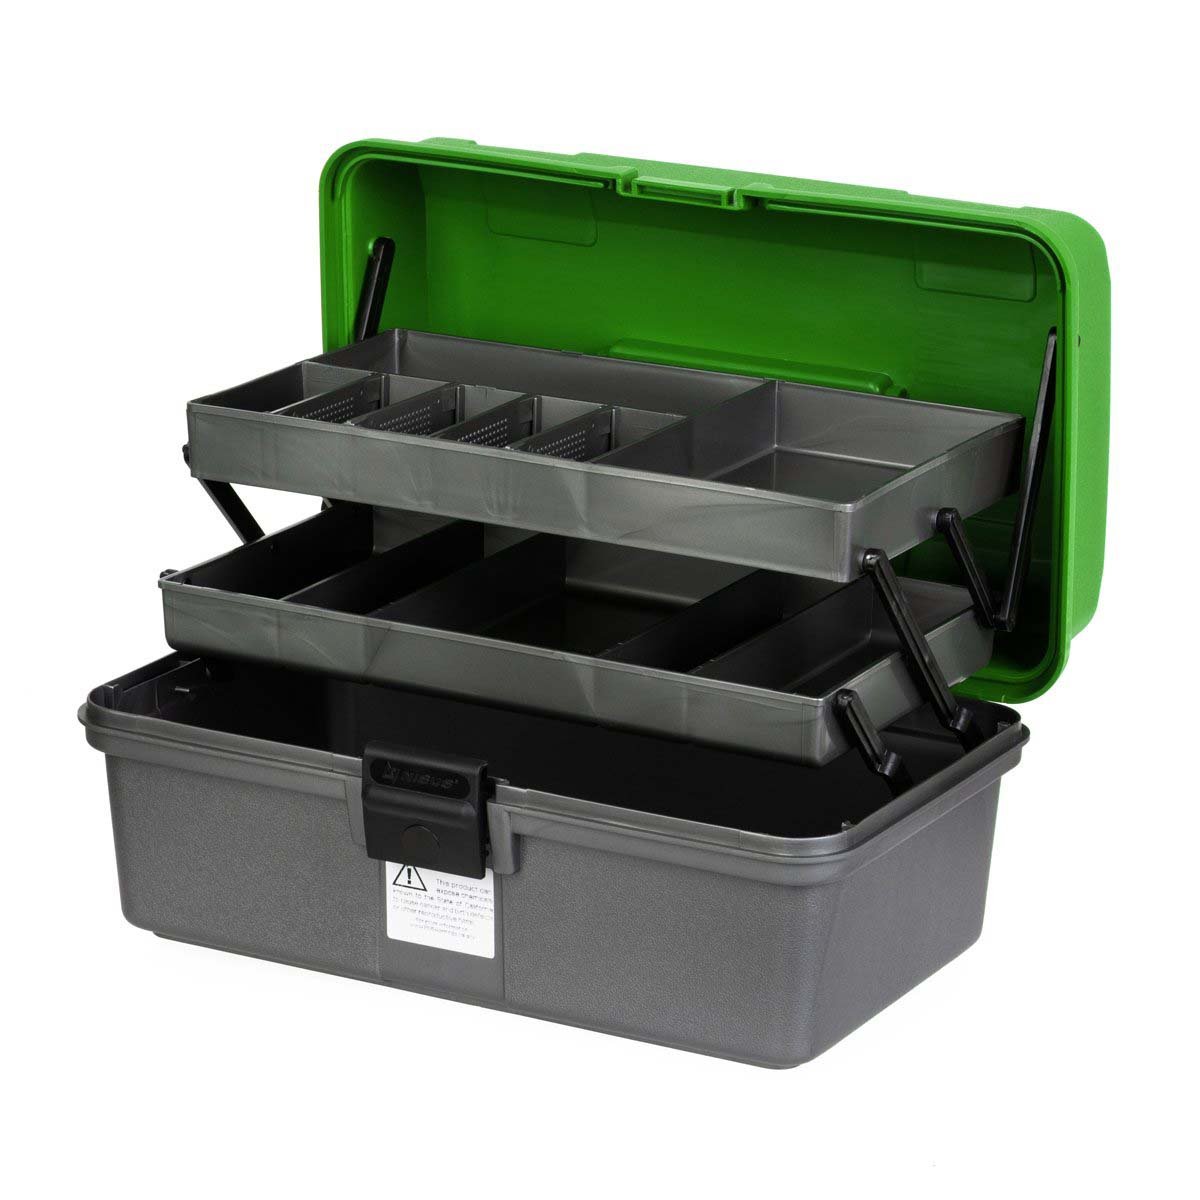 Fishing Tackle Box 2 Fold Out Multi-Tier Trays Fishing Gear at a